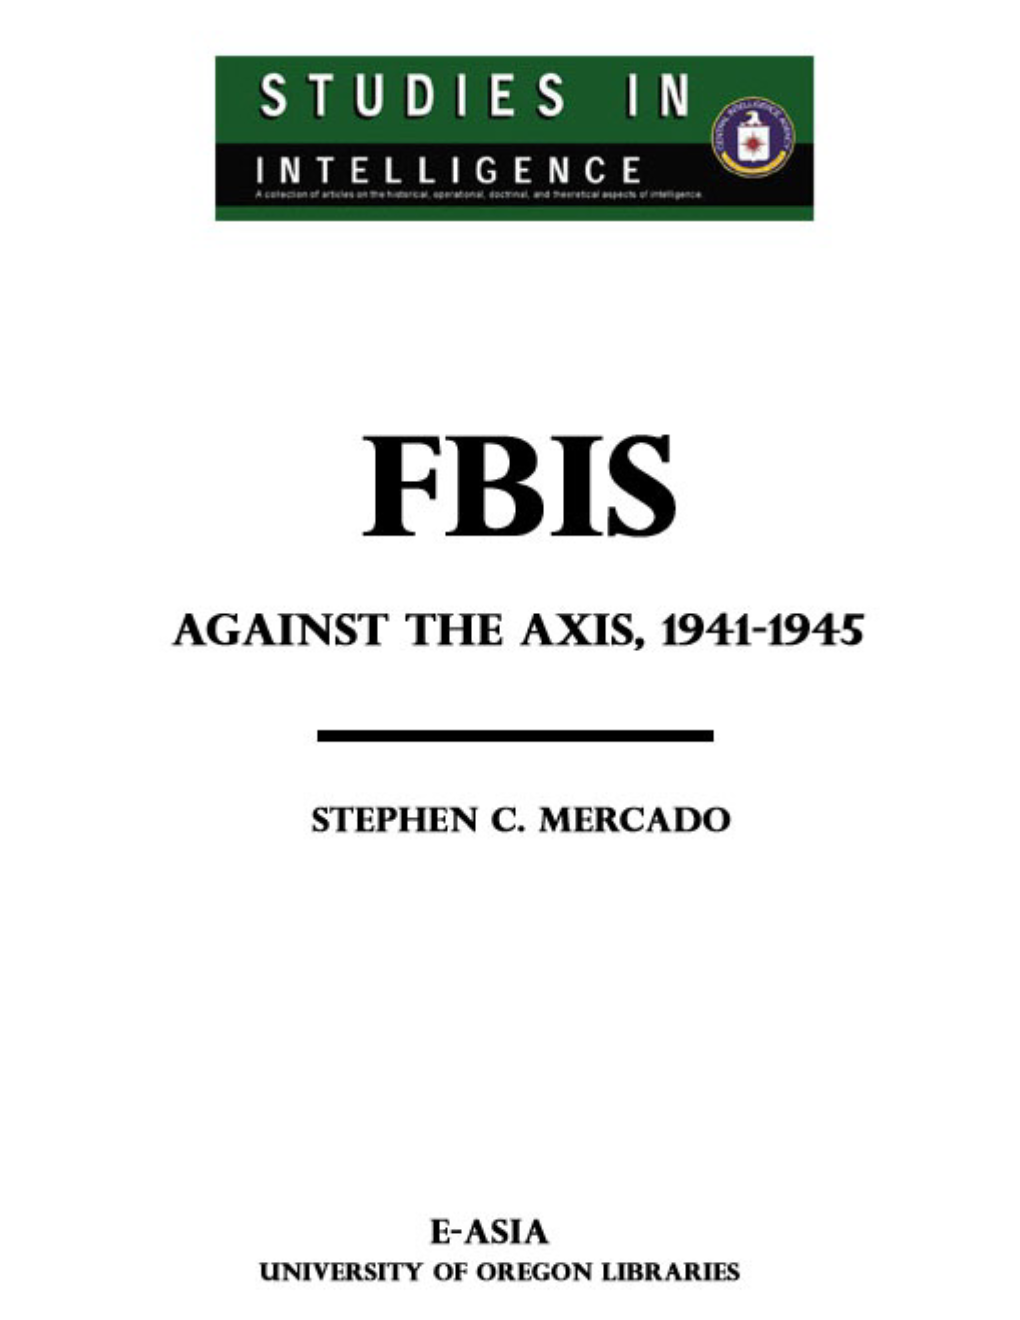 Newsletter of the Foreign Broadcast Information Service, 1942-1945, Which Was Published by FBIS in 1991 in Celebration of Its 50Th Anniversary